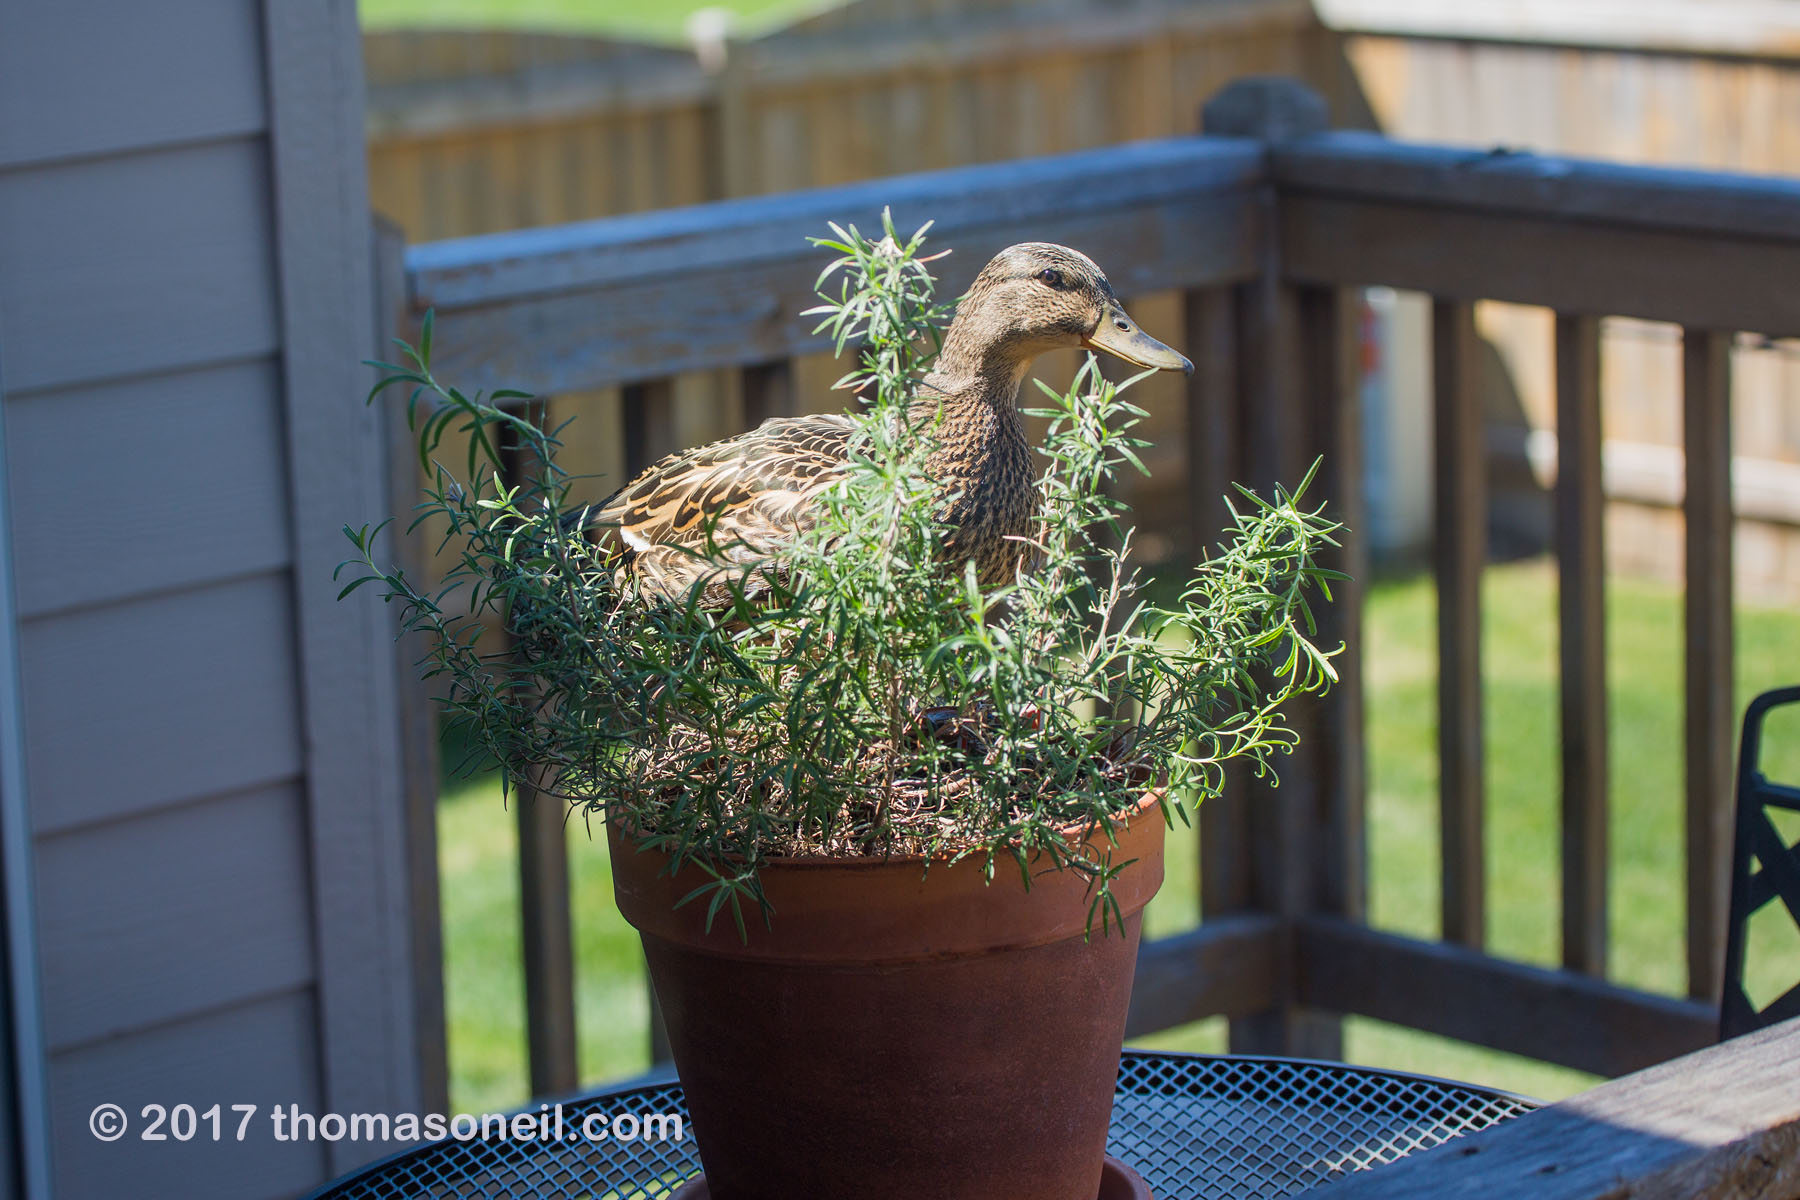 One of the weirder wildlife encounters Ive had.  This duck seemed to be considering building a nest in the rosemary plant on my deck.  Click for next photo.